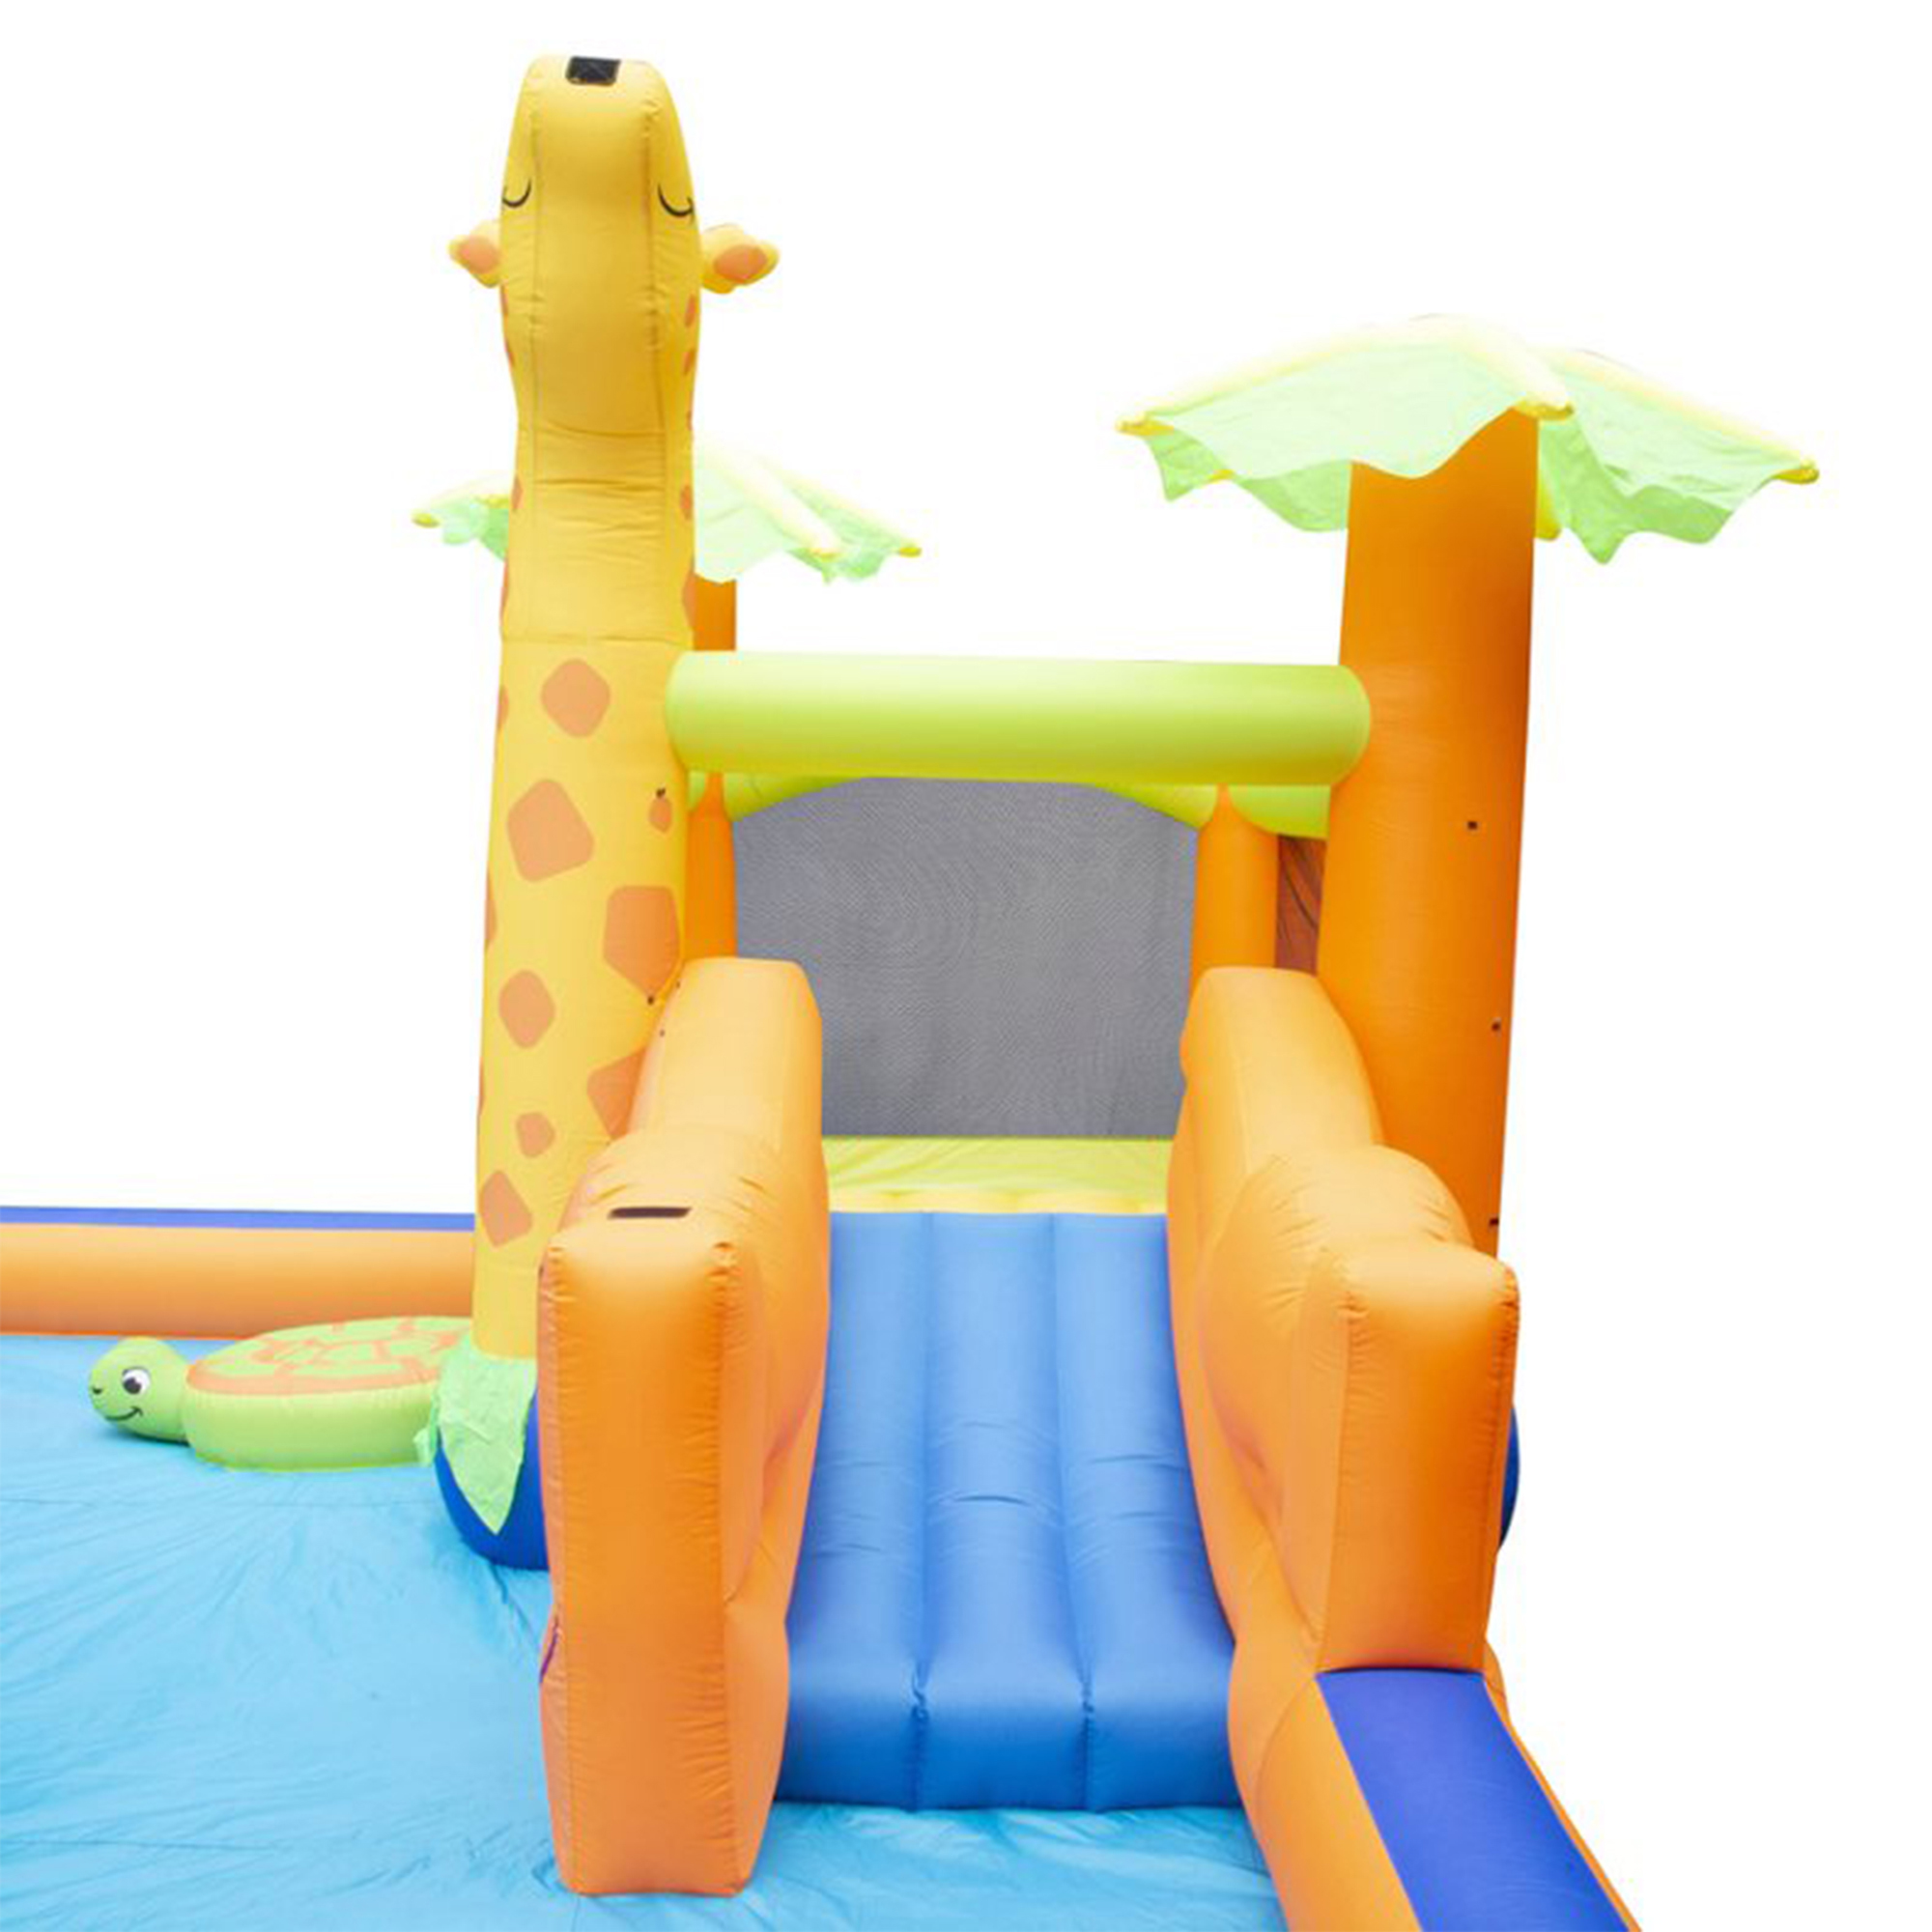 Banzai Safari Splash Water Park Inflatable Bouncer with Cannon and Blower - image 11 of 12